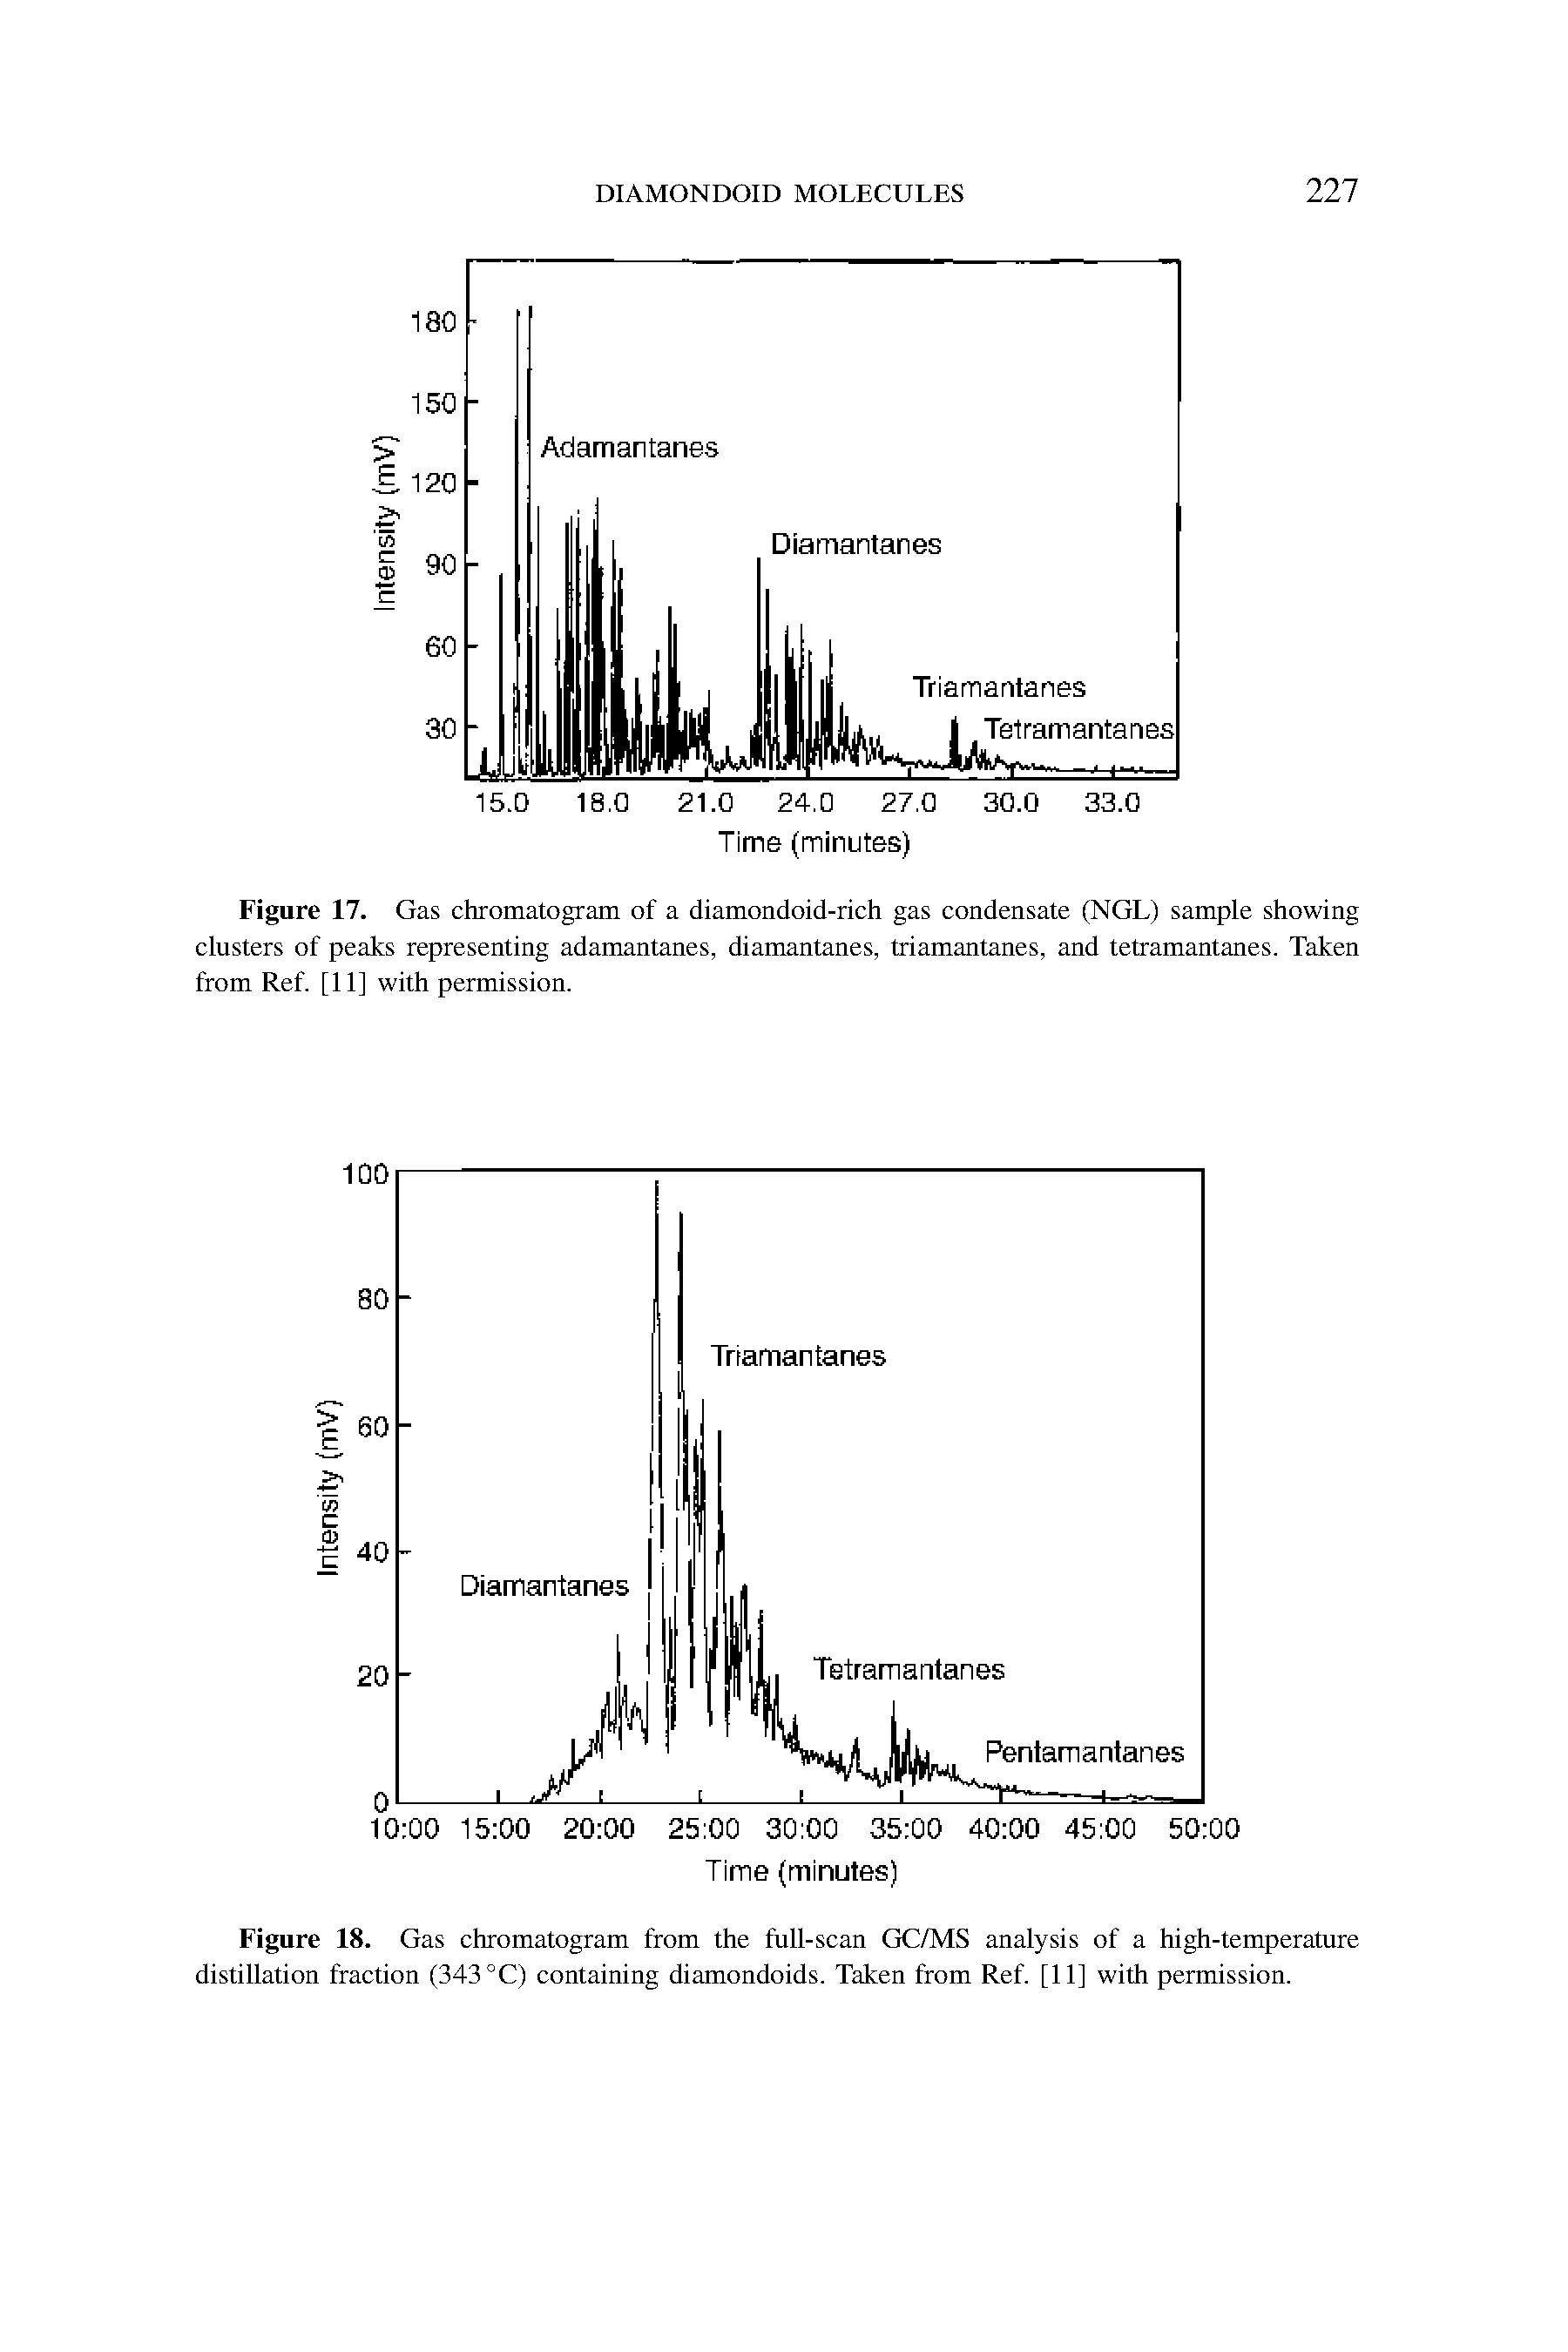 Figure 18. Gas chromatogram from the full-scan GC/MS analysis of a high-temperature distillation fraction (343 °C) containing diamondoids. Taken from Ref. [11] with permission.